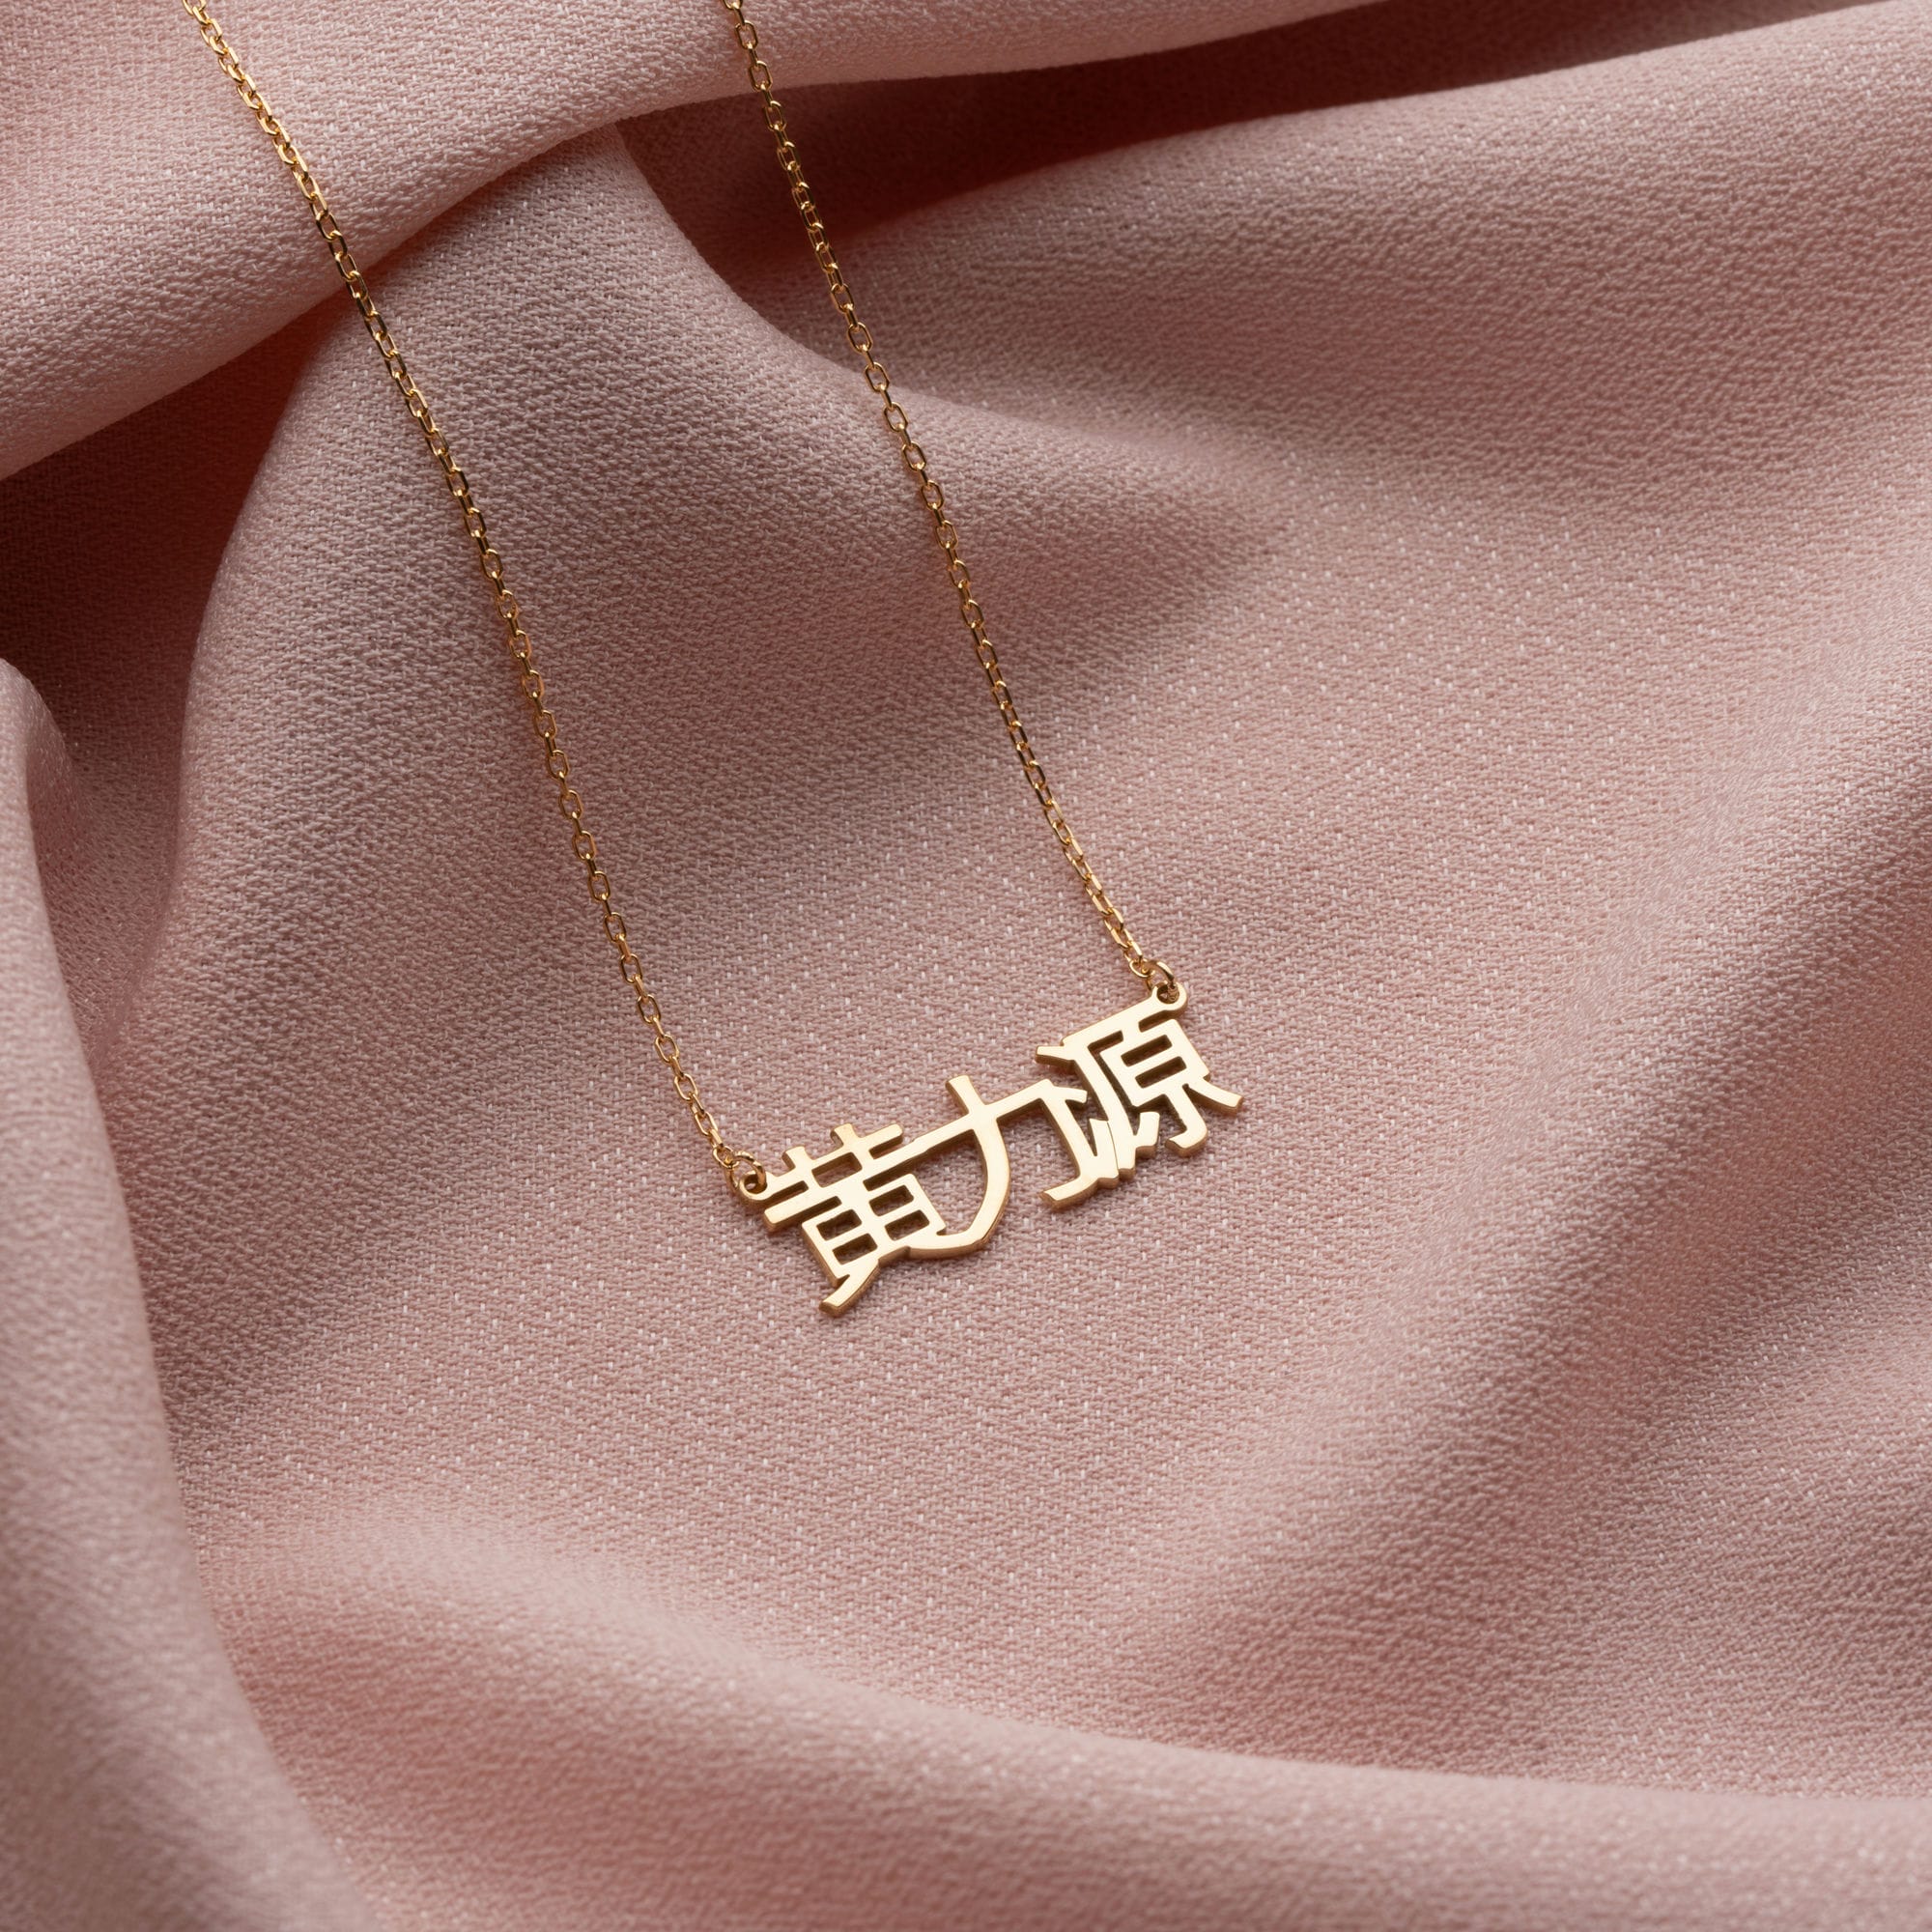 Silver Chinese Name Necklace